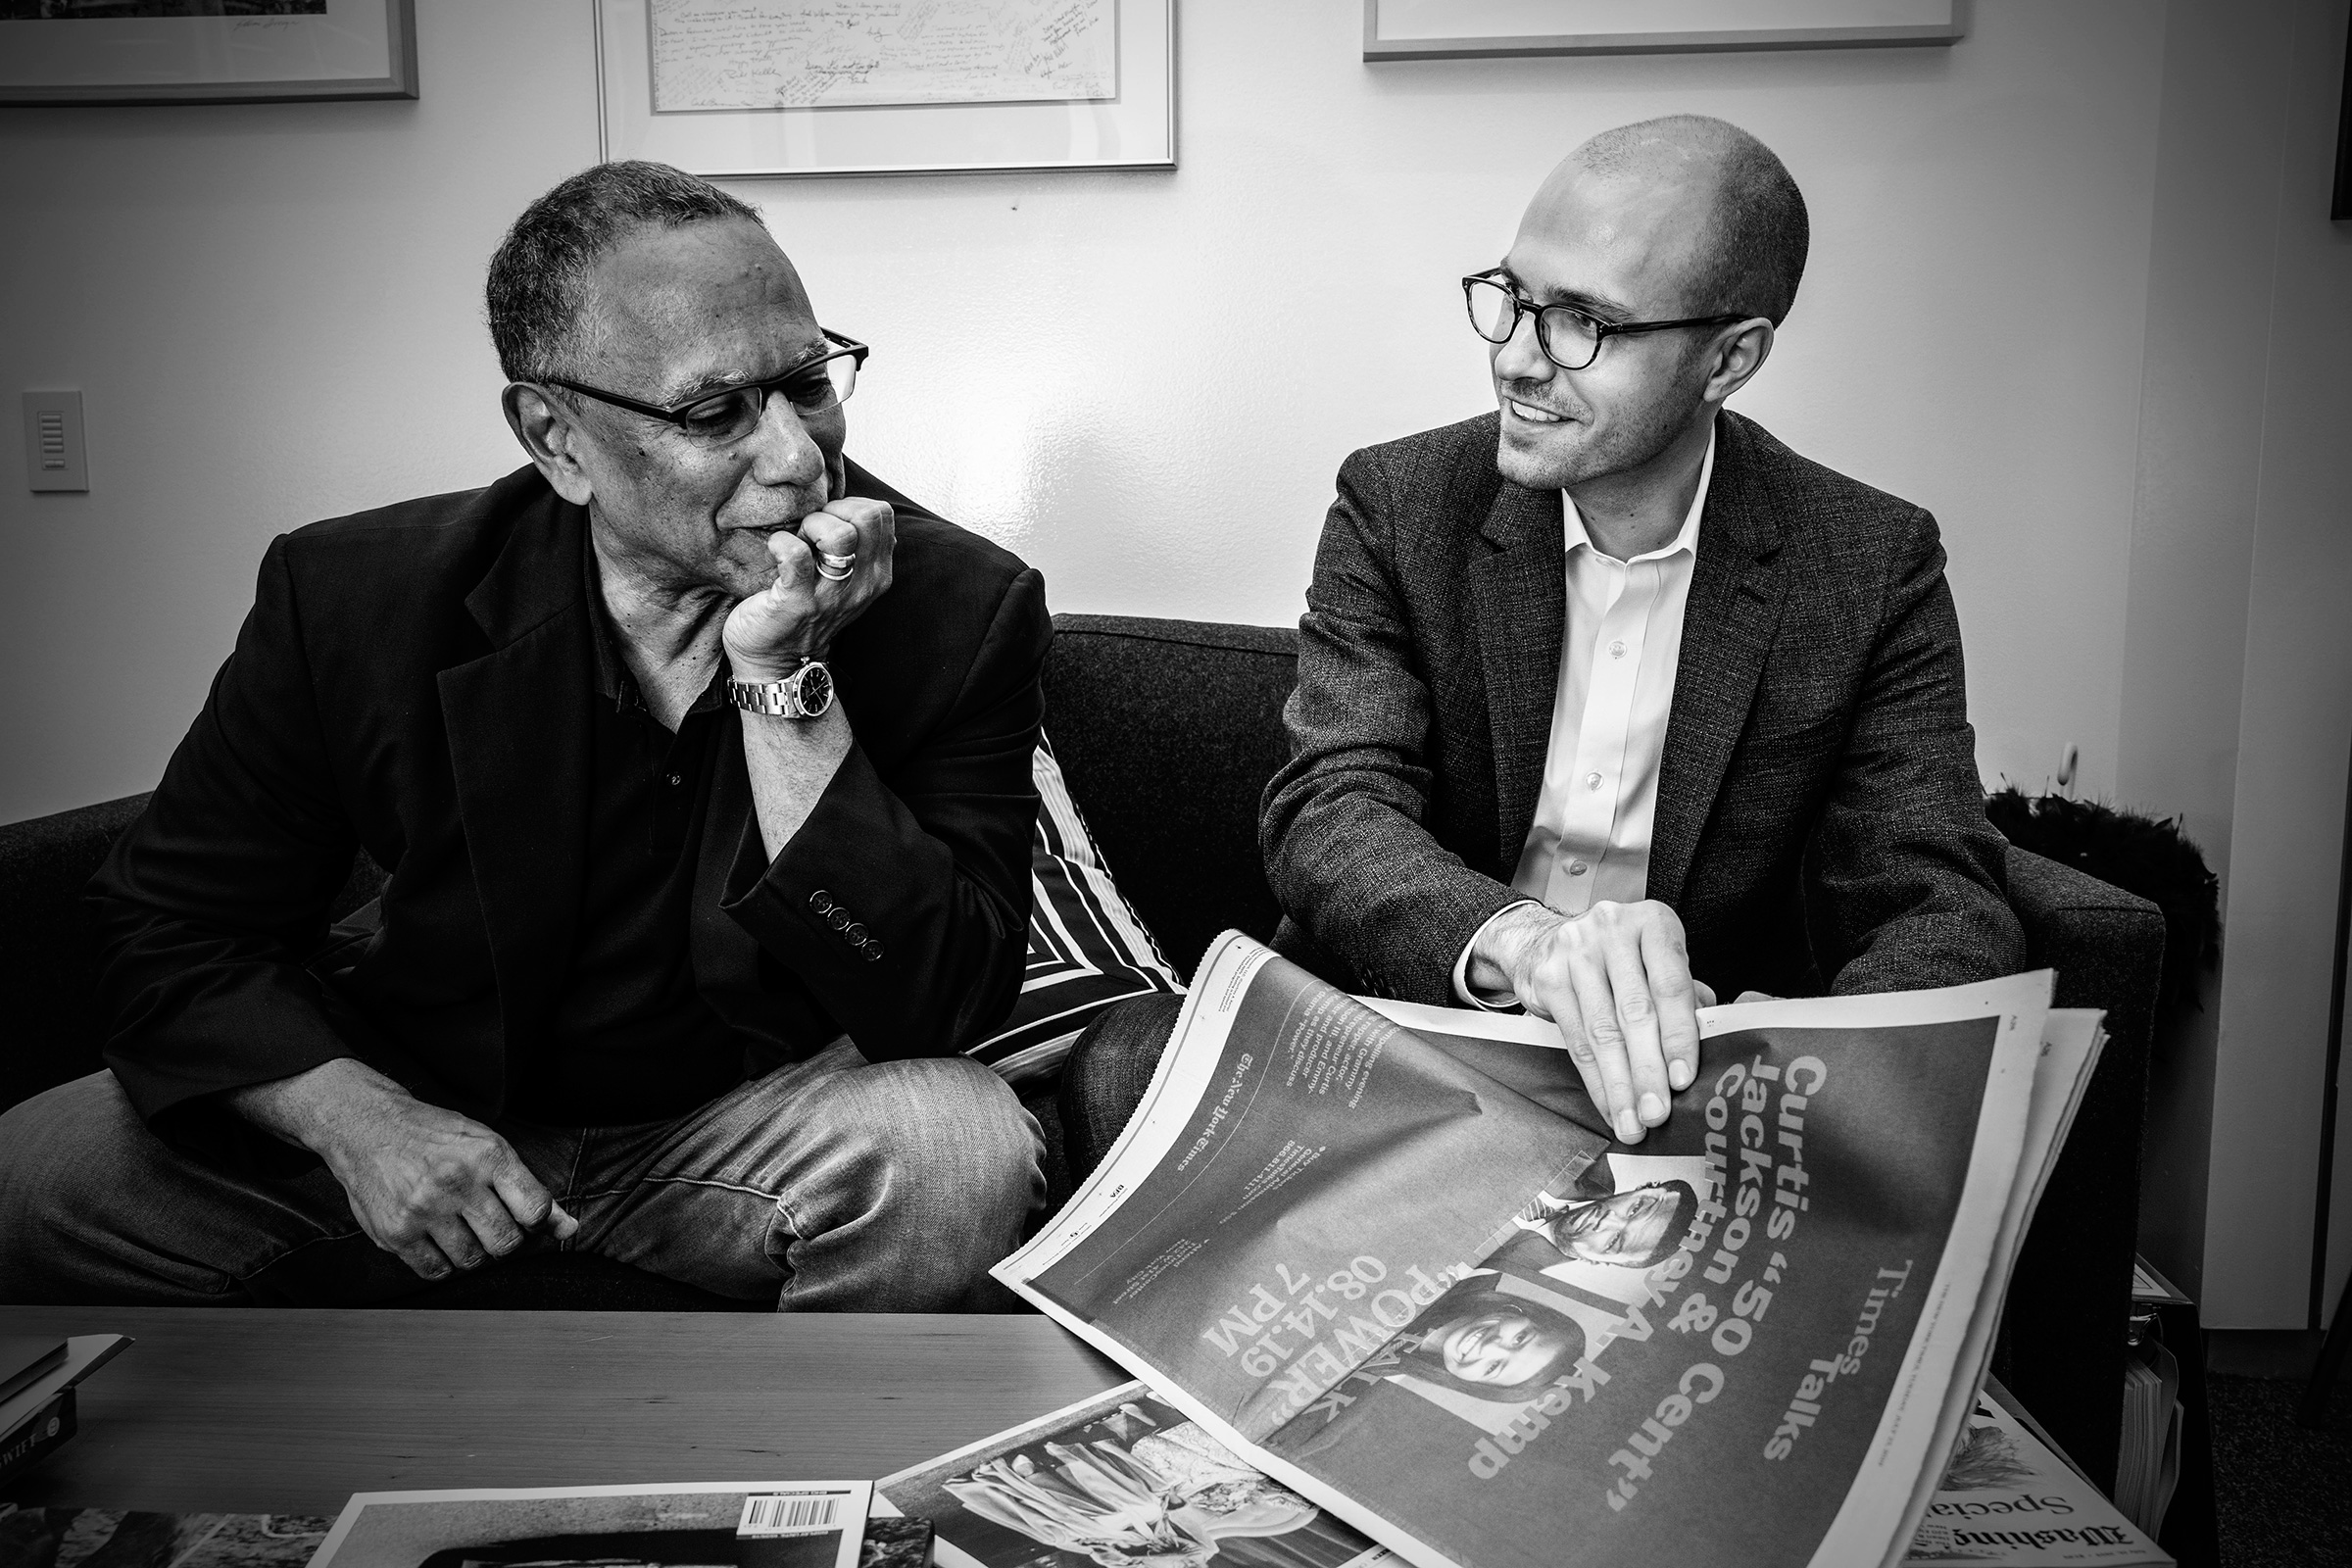 Sulzberger found a partner in Times editor Baquet, left (Mark Peterson—Redux for TIME)